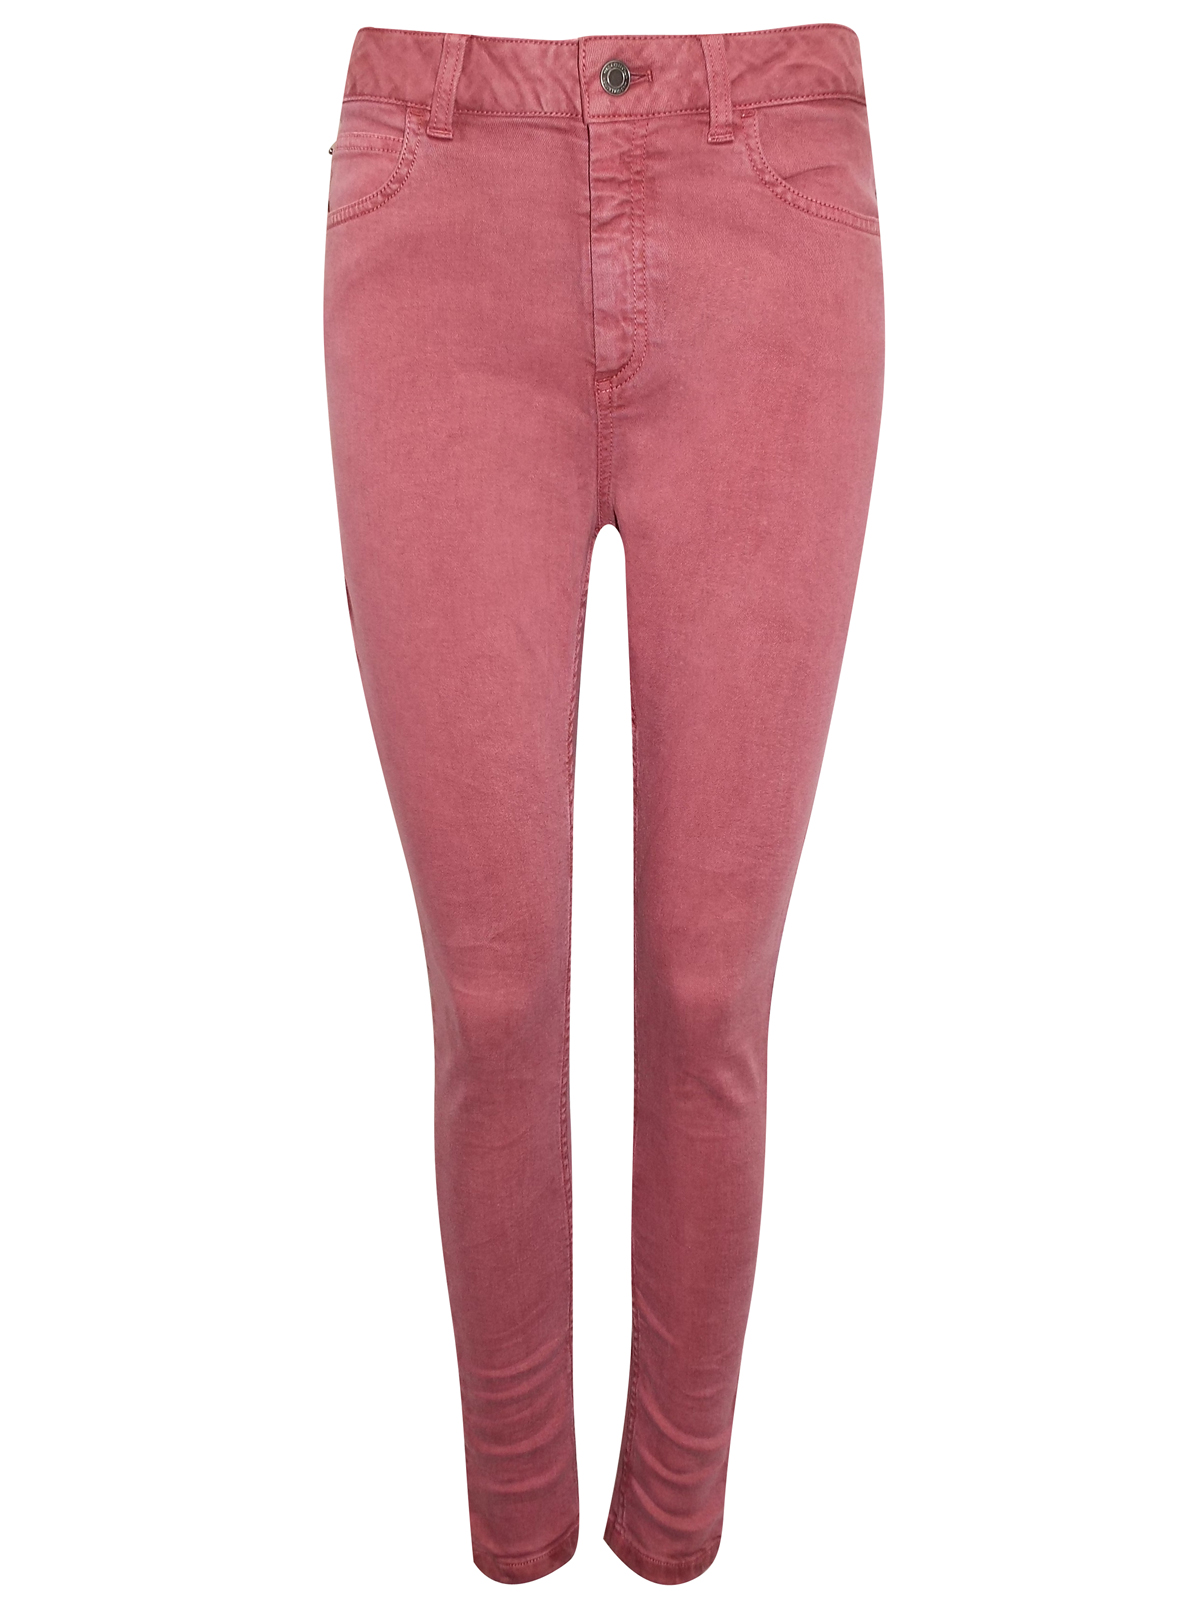 Marks and Spencer - - M&5 ROSE-PINK Mid Rise Super Skinny Jeans - Size 12